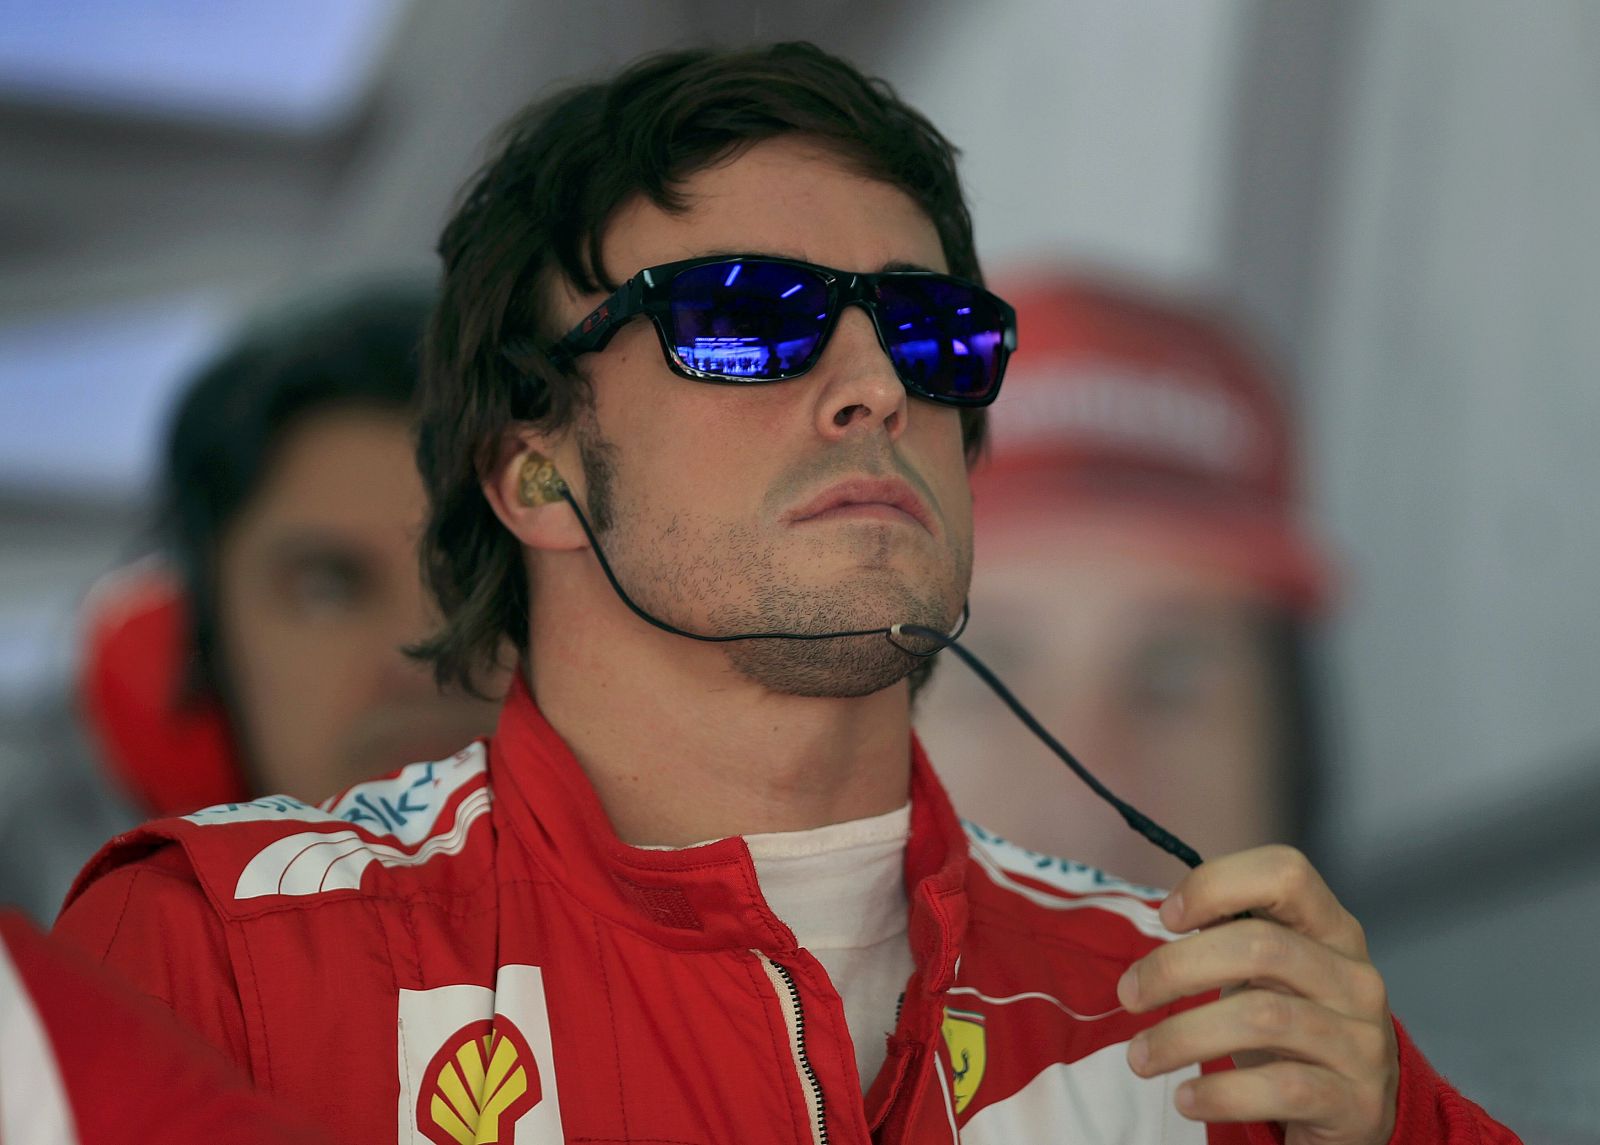 Ferrari Formula One driver Alonso looks at a monitor during the third practice session of the Bahrain F1 Grand Prix at the Sakhir circuit in Manama